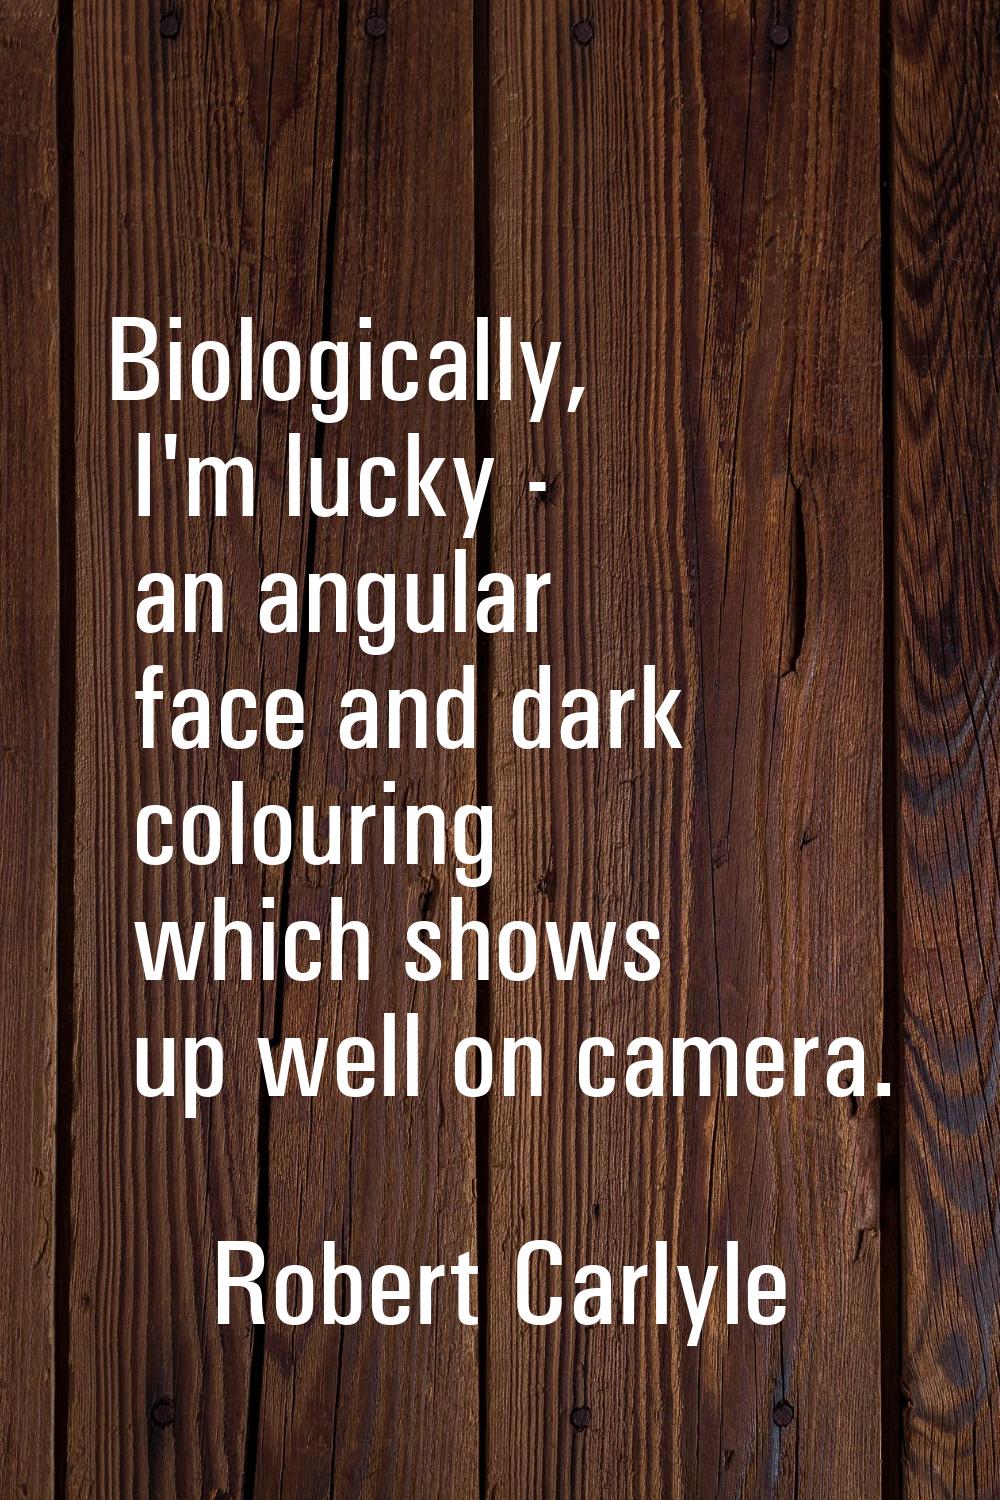 Biologically, I'm lucky - an angular face and dark colouring which shows up well on camera.